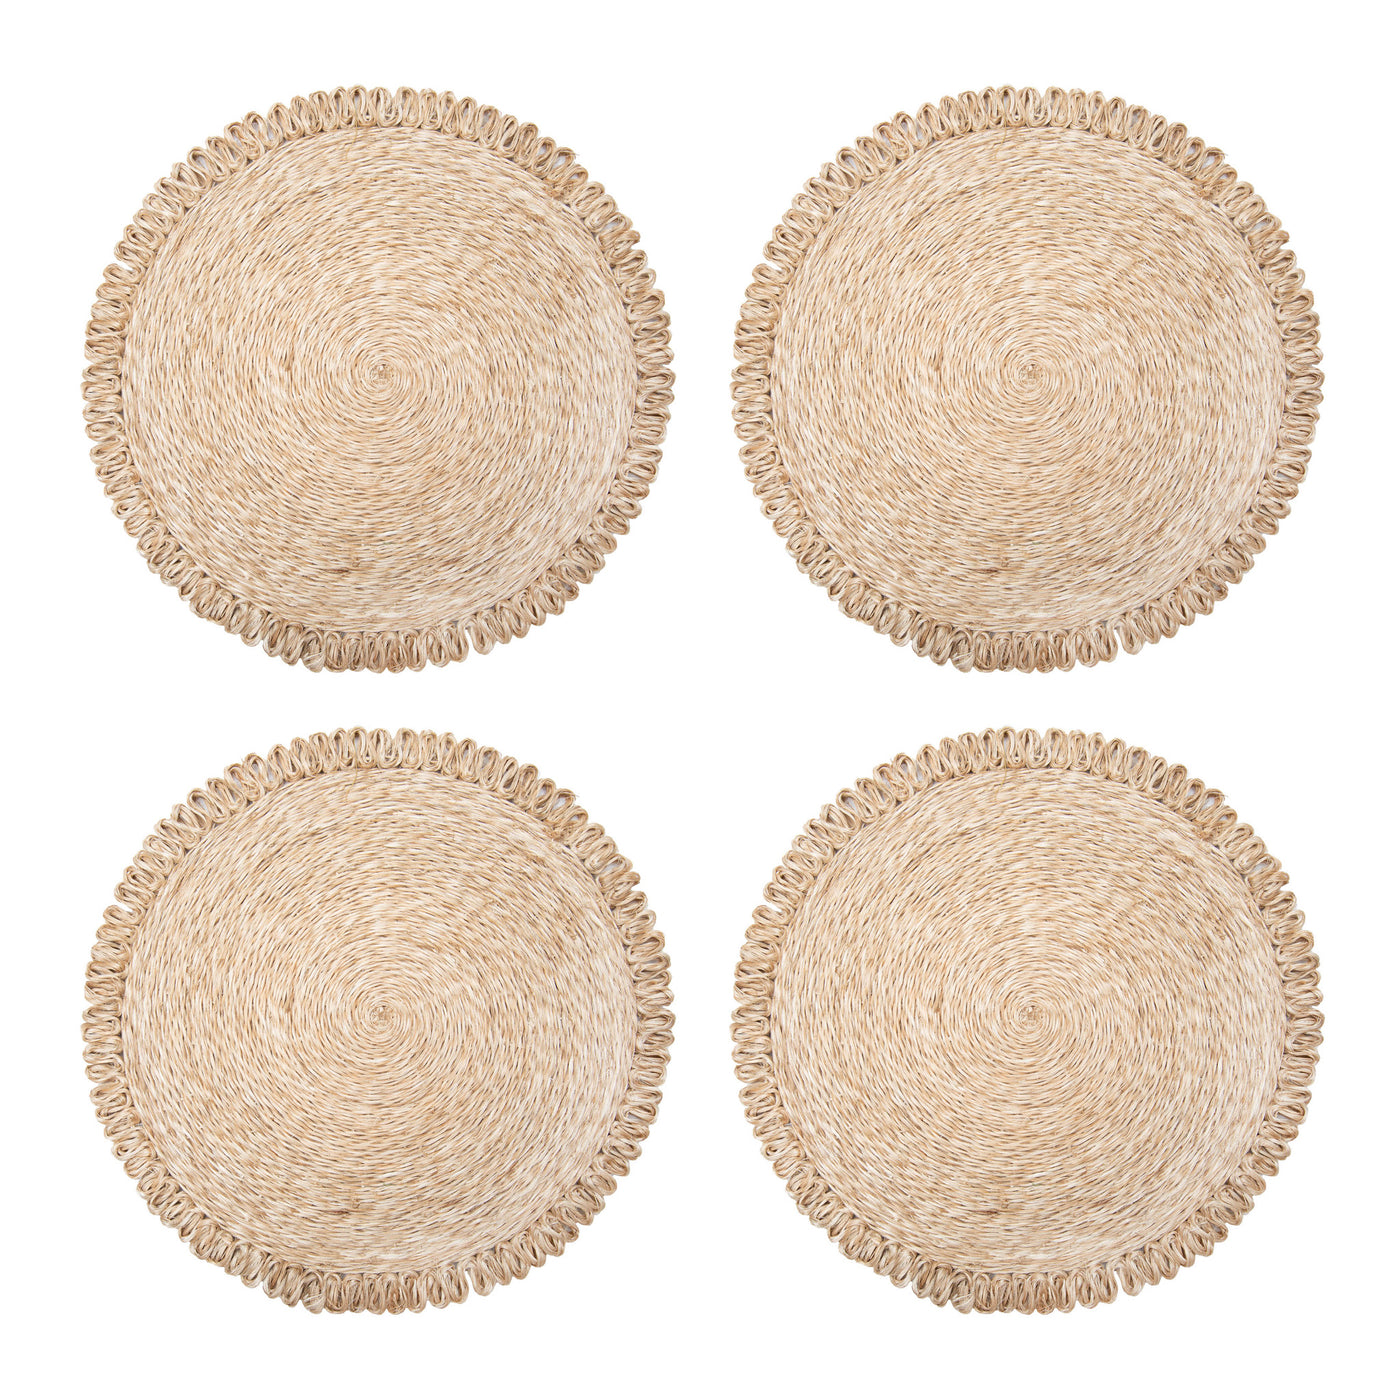 Loopy Abaca Natural 15" Round - Set of 4